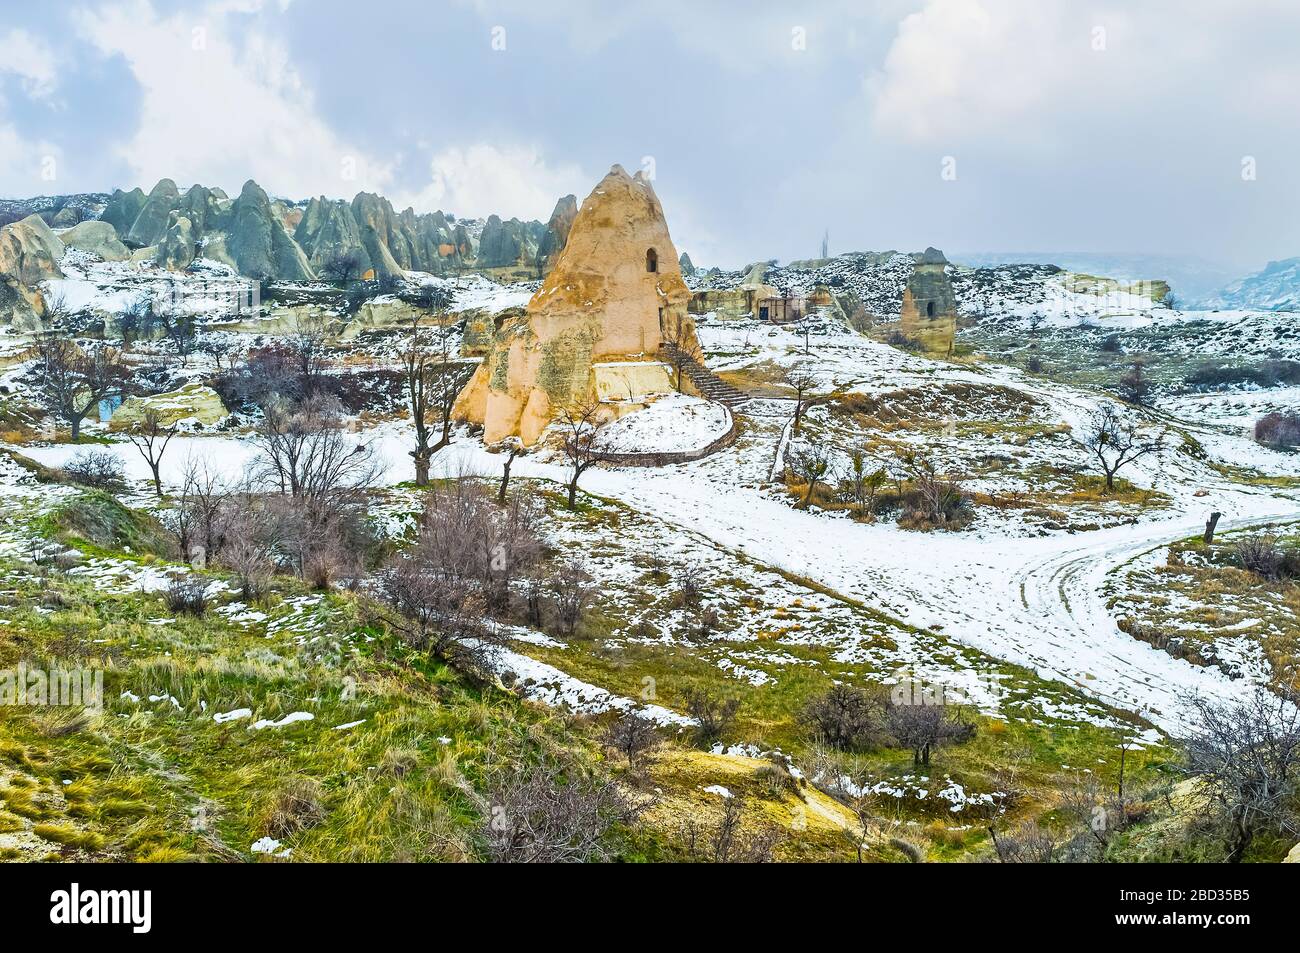 The landscape of winter  Cappadocia with El Nazar Kilise or Evil Eye Church, located in large yellow rock, Turkey Stock Photo